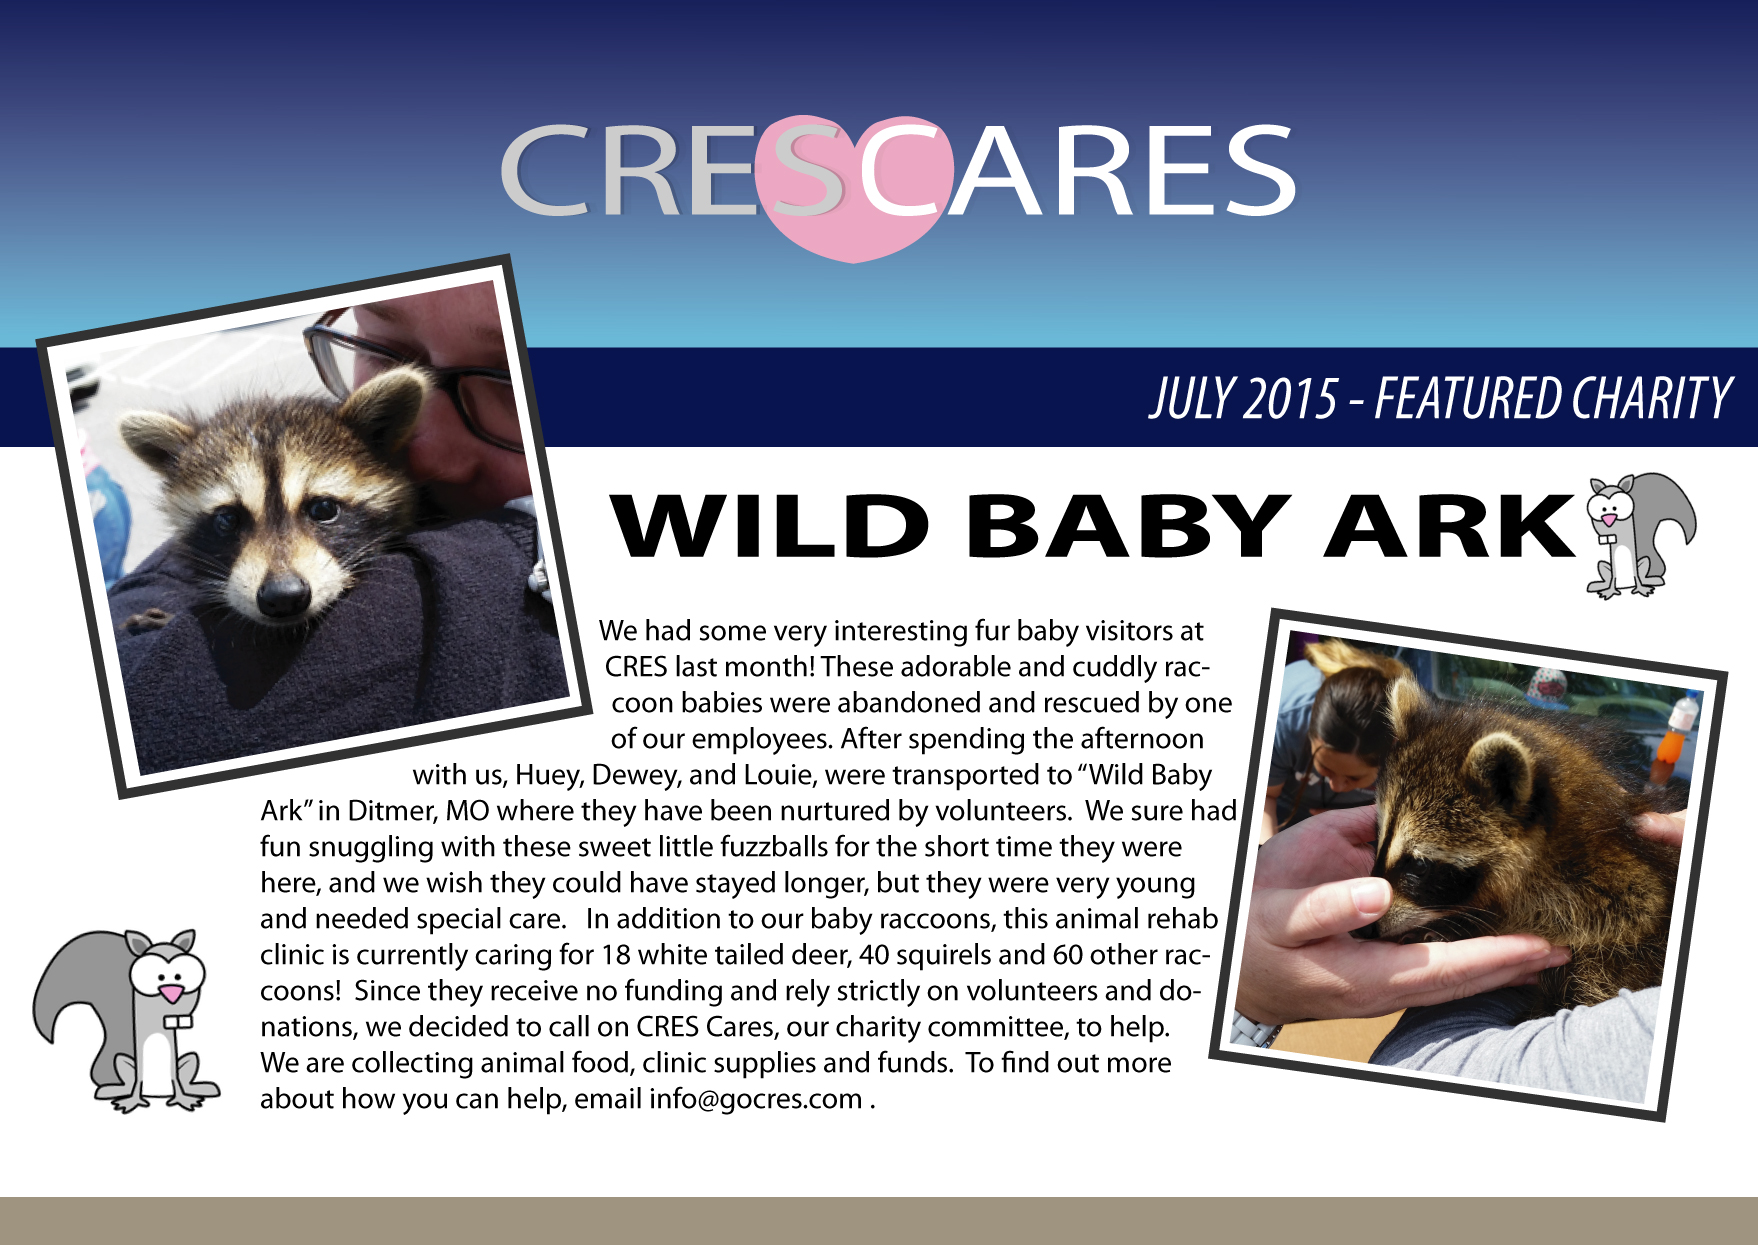 Raccoon-Promotion-Featured-Charity-July-2015